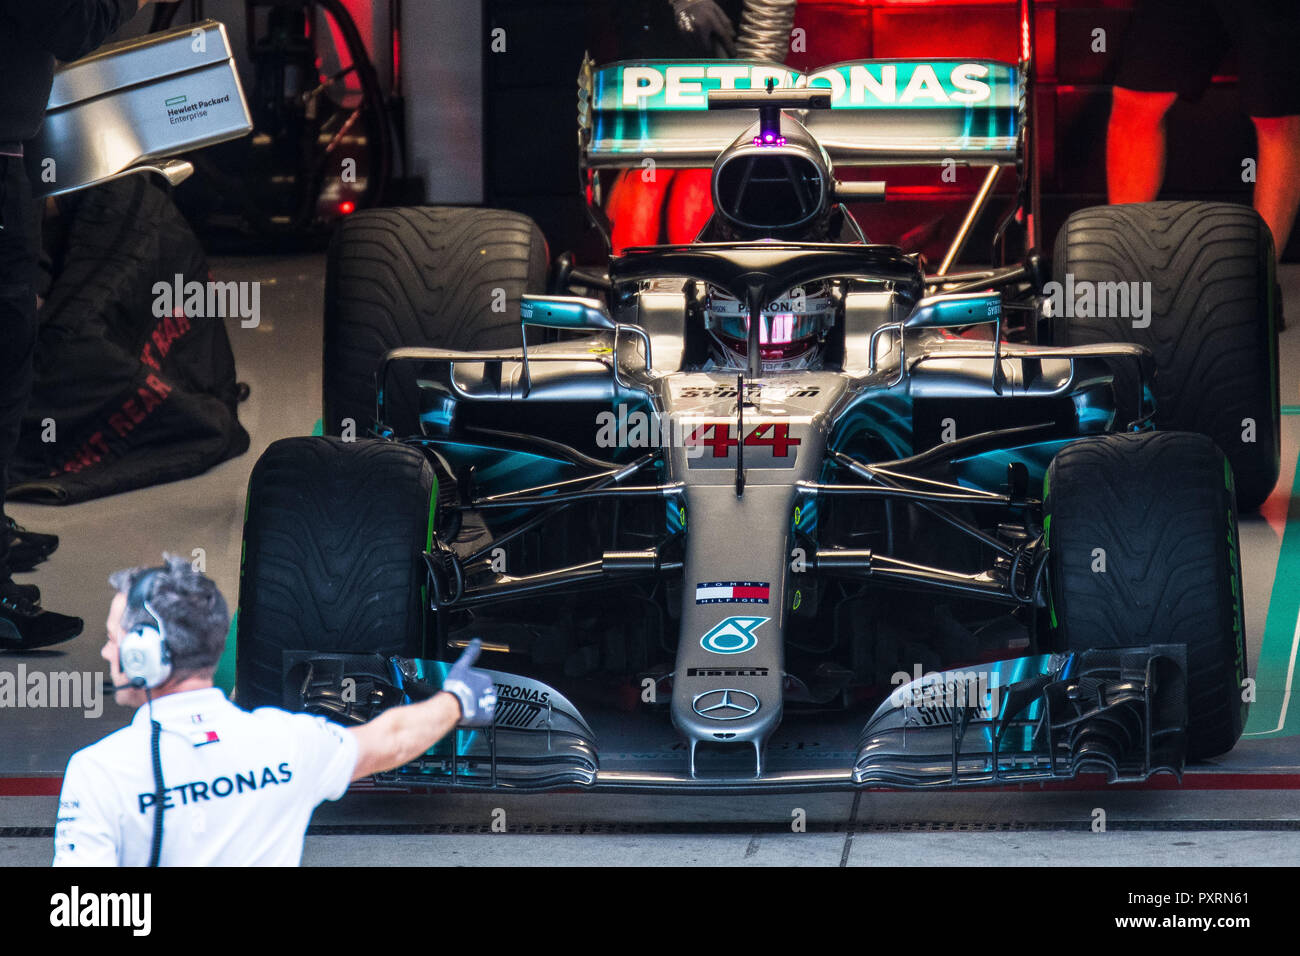 Austin, Texas, USA. 19th Oct, 2018. Lewis Hamilton, Mercedes, ready for Practice 2 at the US Grand Prix at the Circuit of the Americas, October 19, 2018, Austin, Texas. Credit: Eddie Hurskin/ZUMA Wire/Alamy Live News Stock Photo